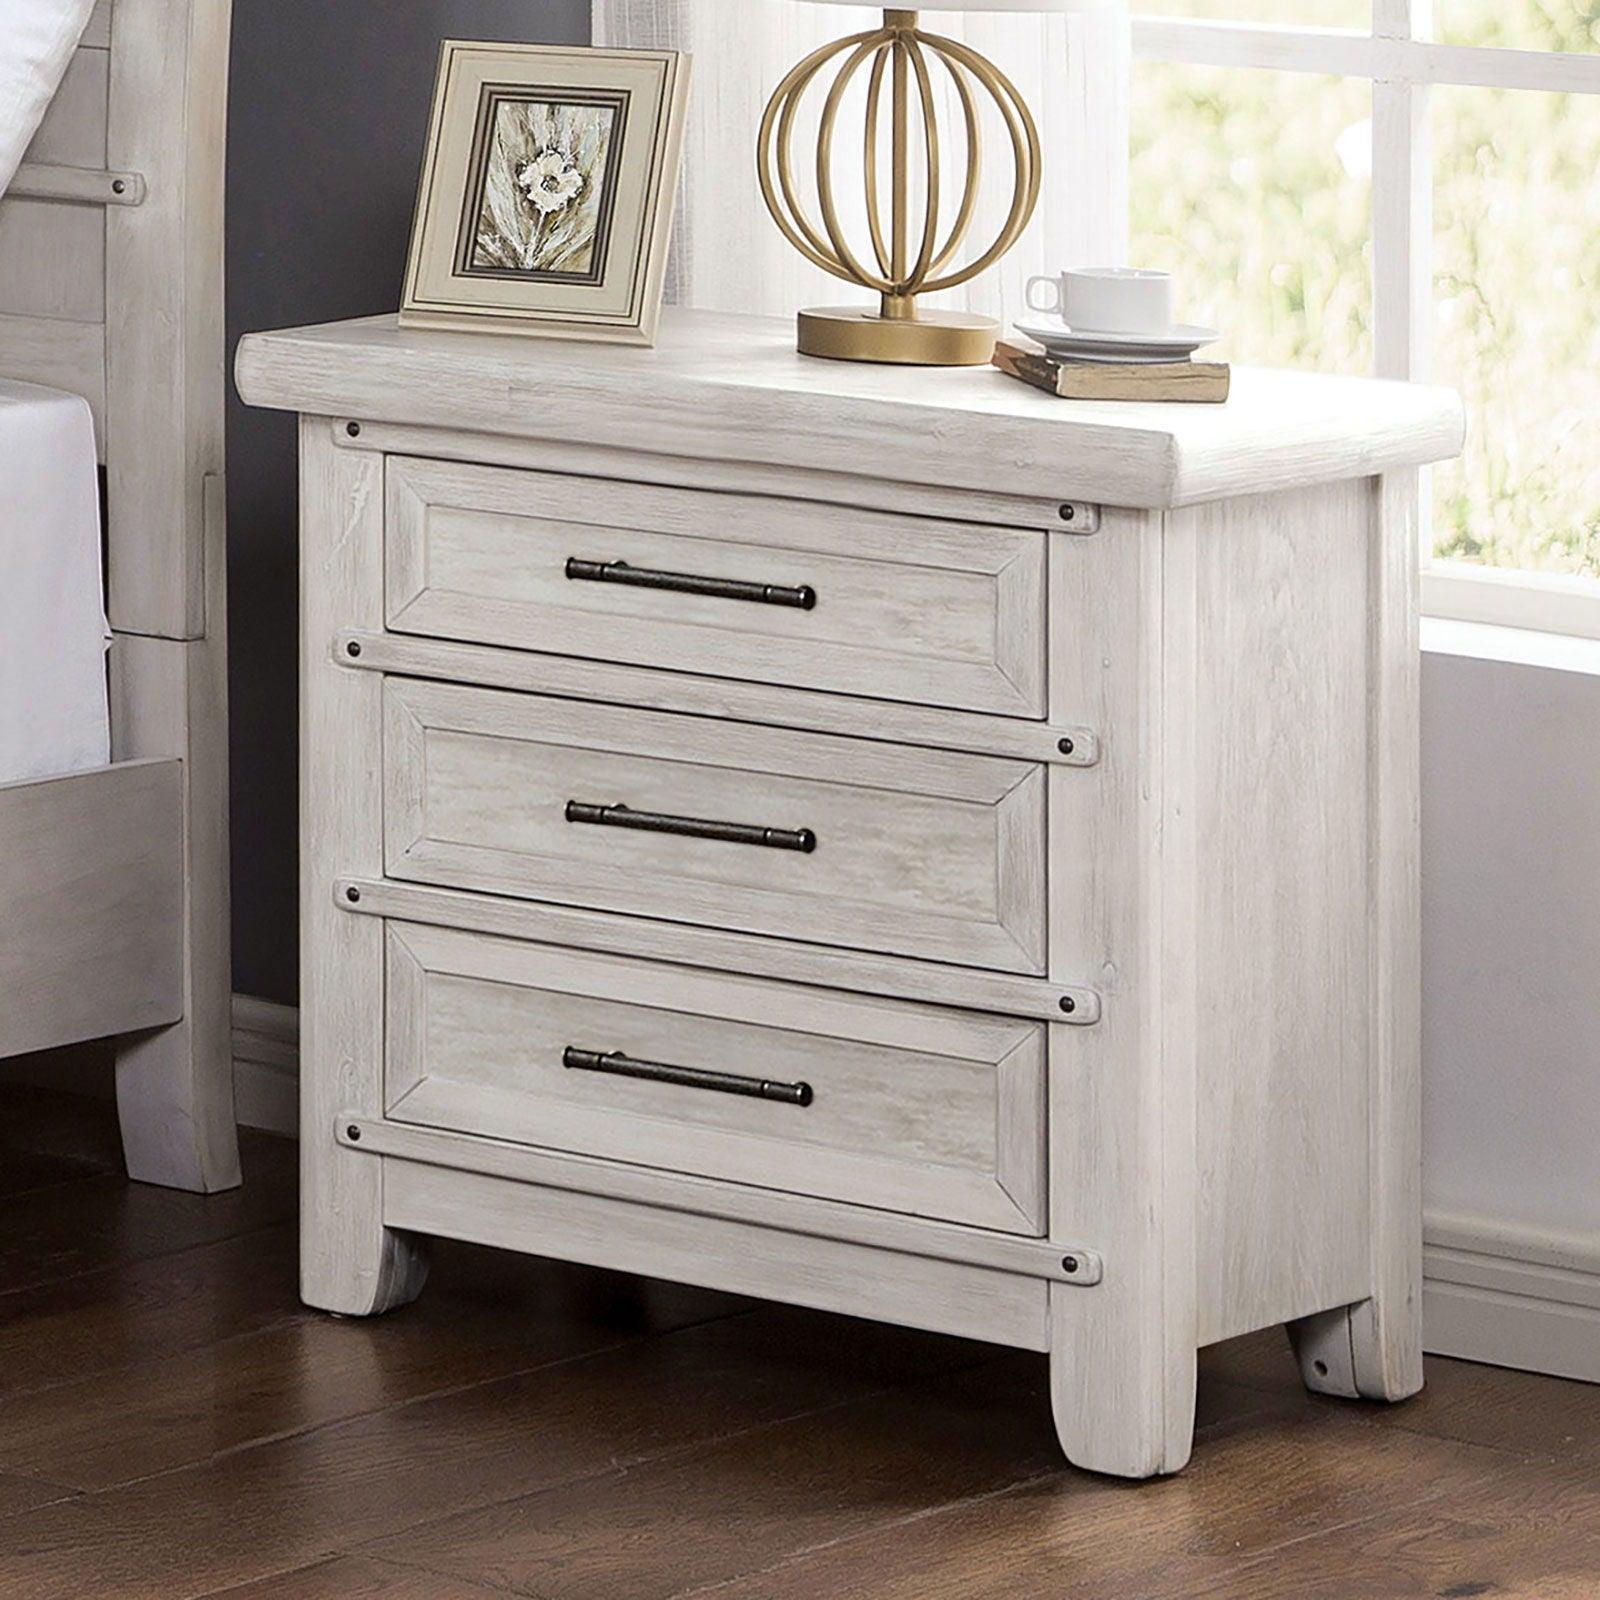 Furniture of America - Shawnette - Nightstand With USB Plug - Antique White - 5th Avenue Furniture